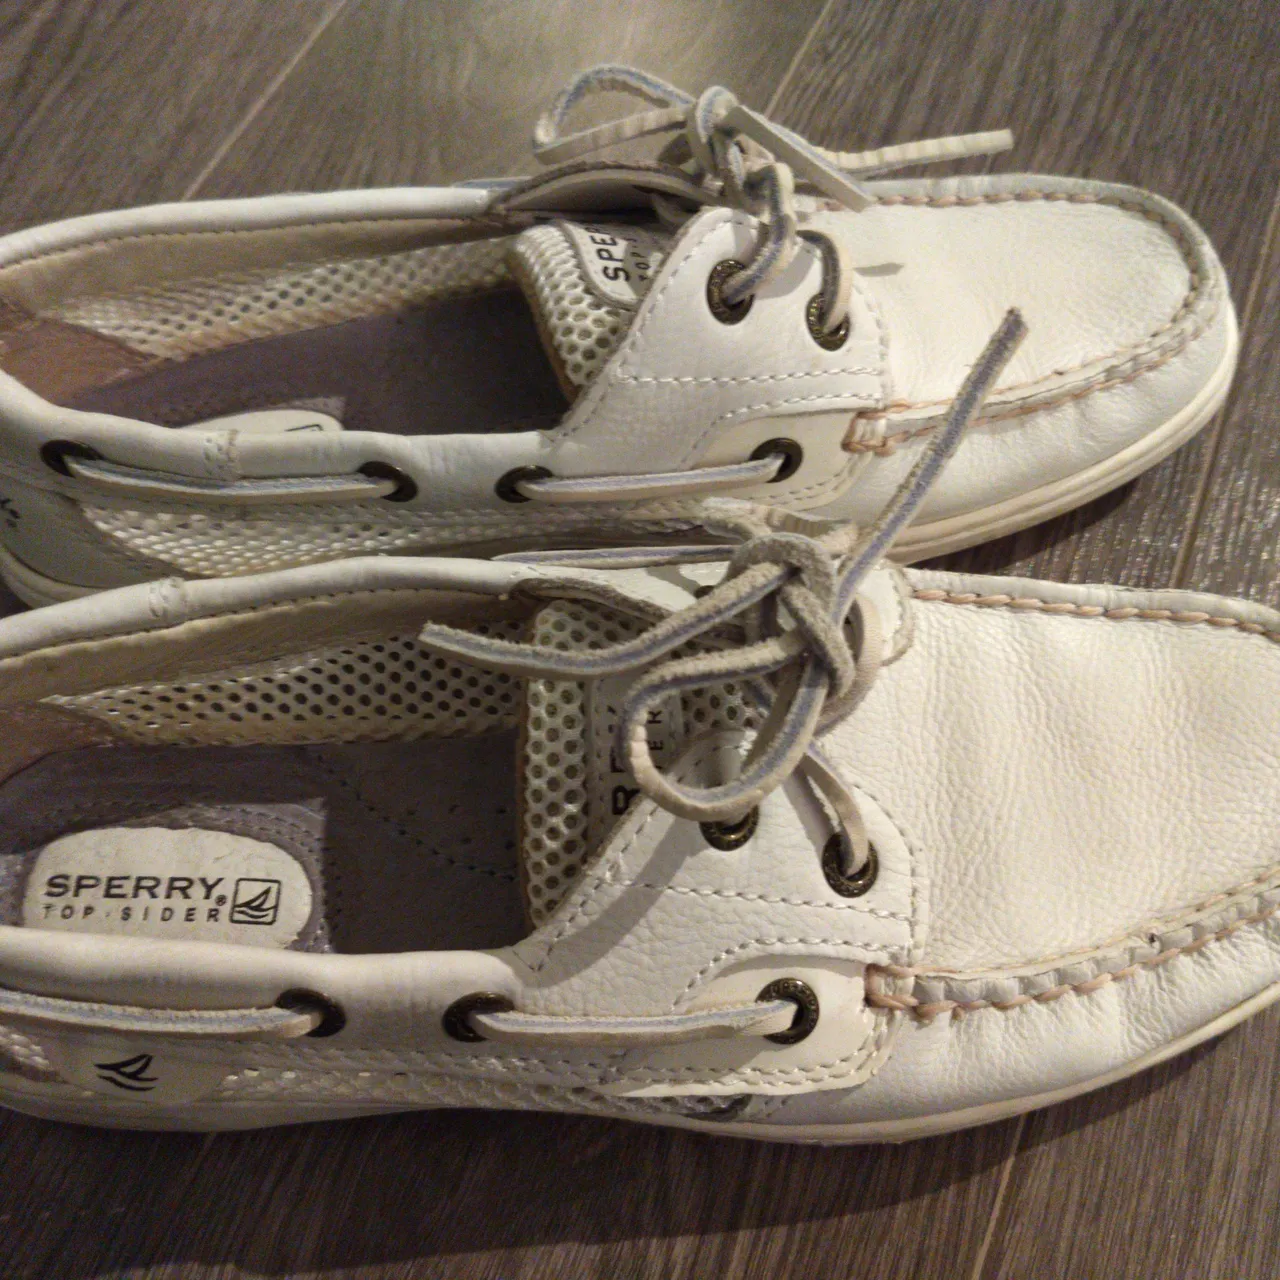 Sperry Top-Sider Shoes photo 1